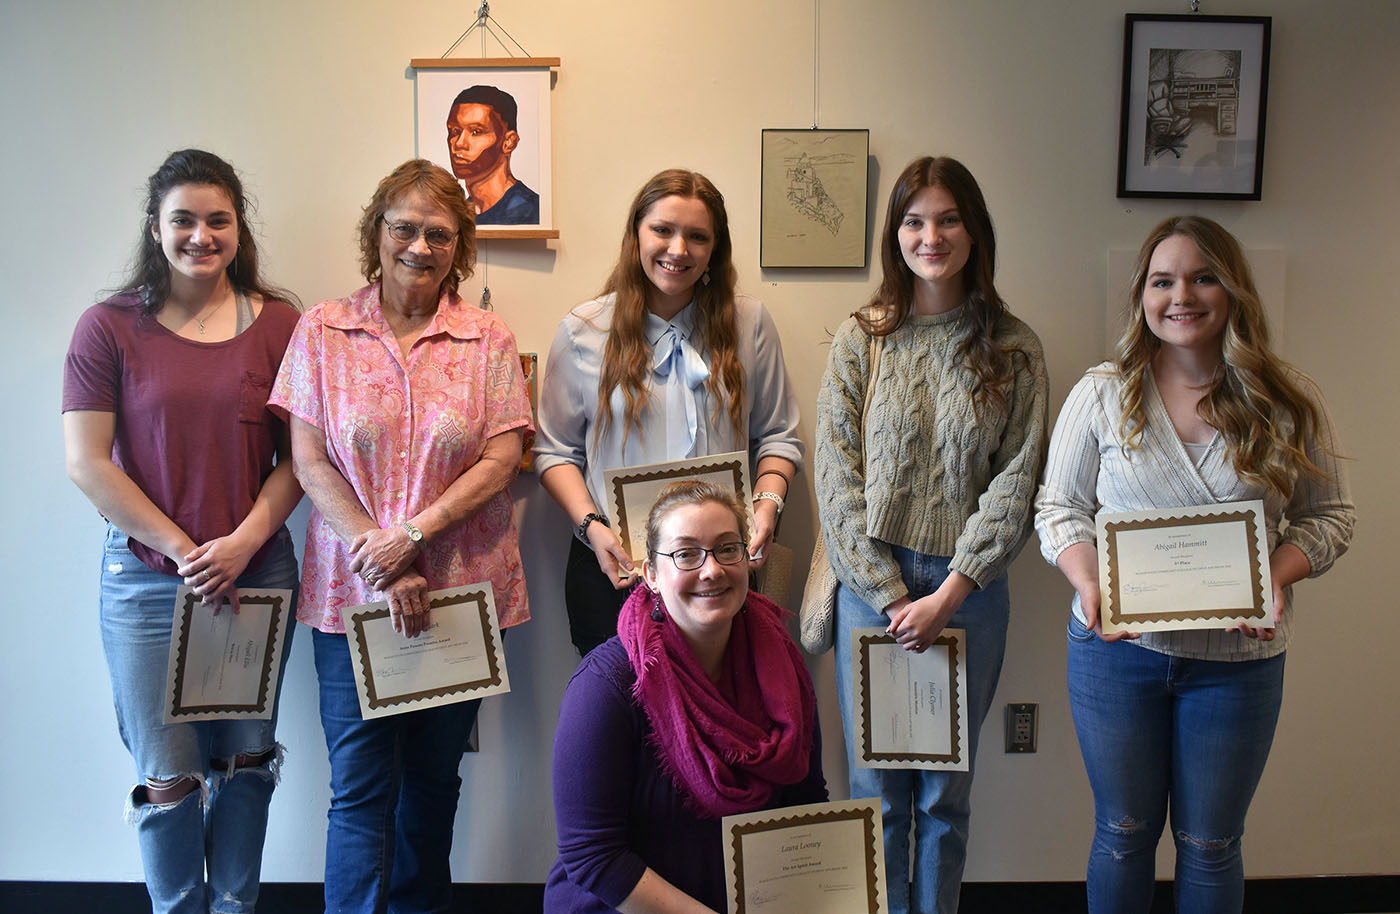 Shown are Art Department award winners and winners from Roane State’s Student Art Show. From left: Abigail Elllis, Debbee Clark representing her husband Archie Clark, Maya Collins, Julia Clymer and Abigail Hammitt. In front is Laura Looney.